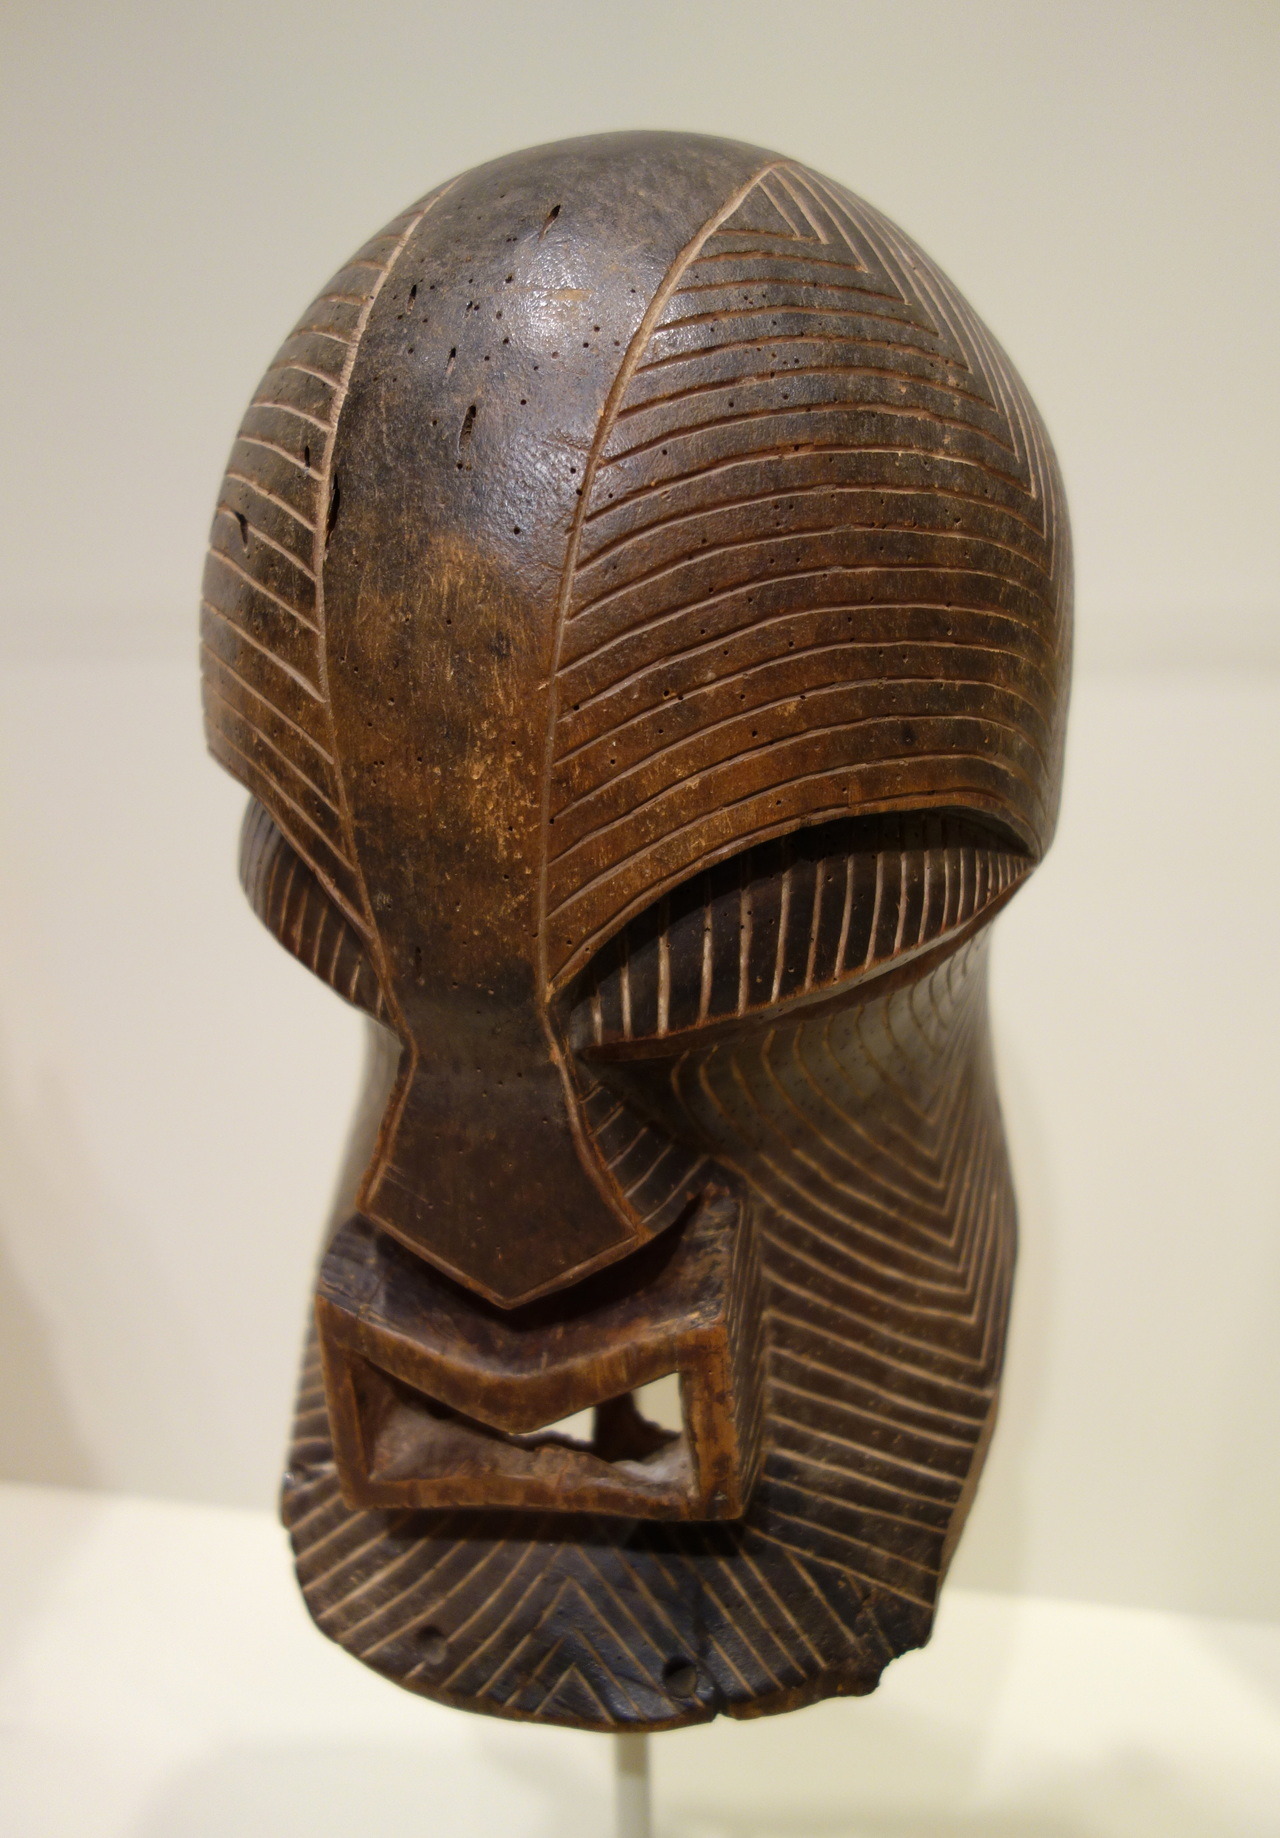 Face mask of the Kifwebe society, Songye or Luba peoples, present-day Democratic Republic of the Con